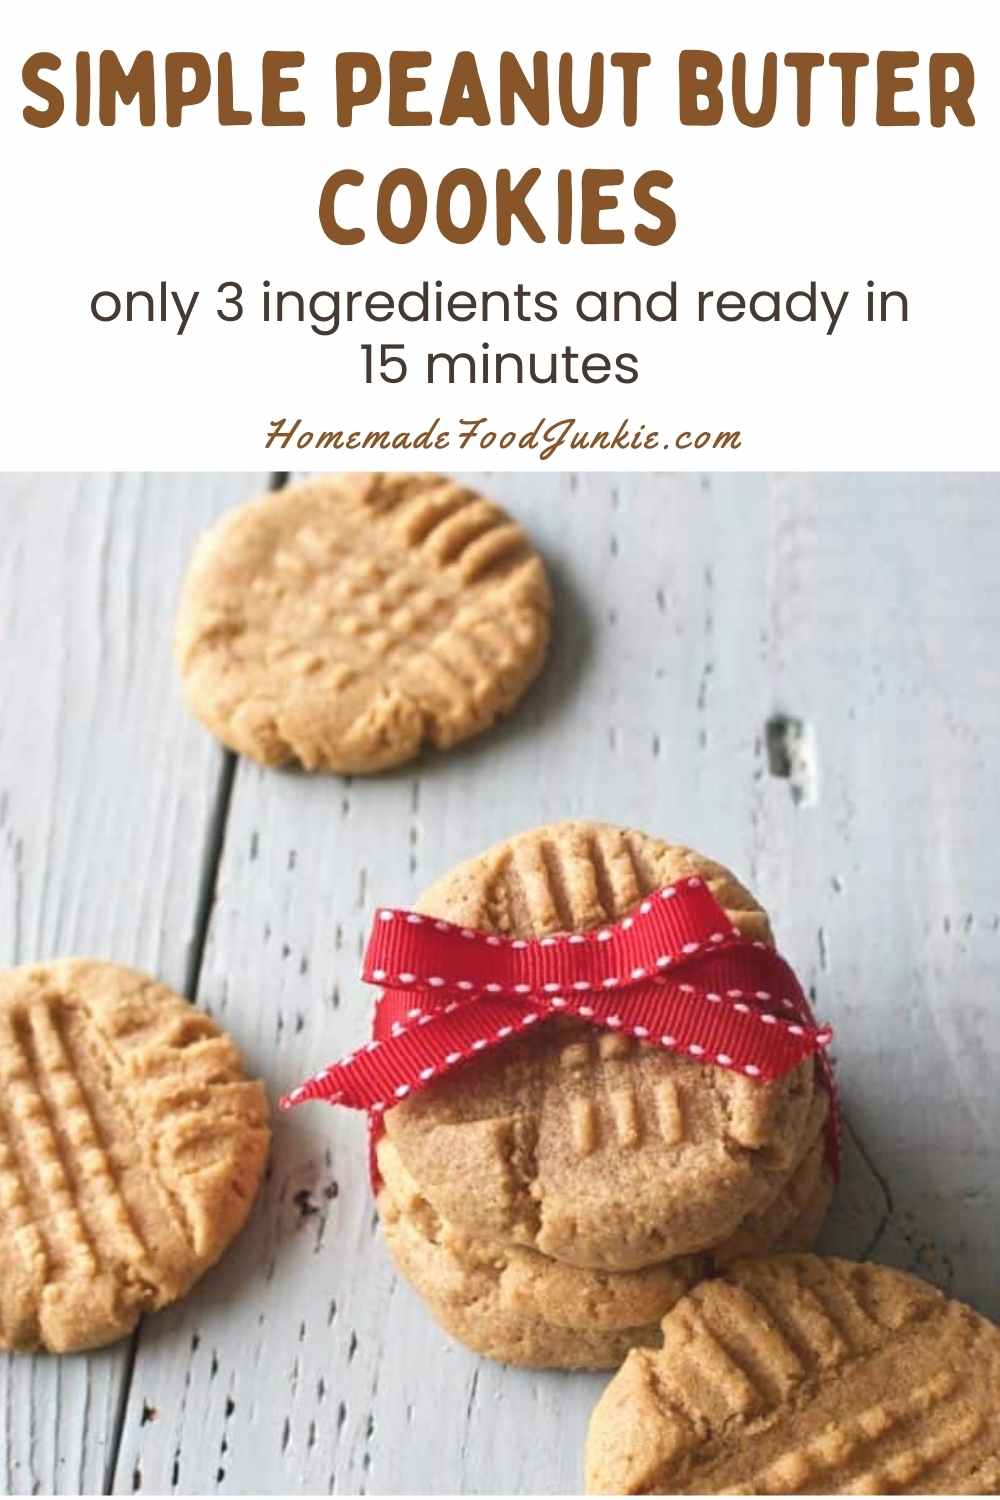 Simple Peanut Butter Cookies-Pin Image